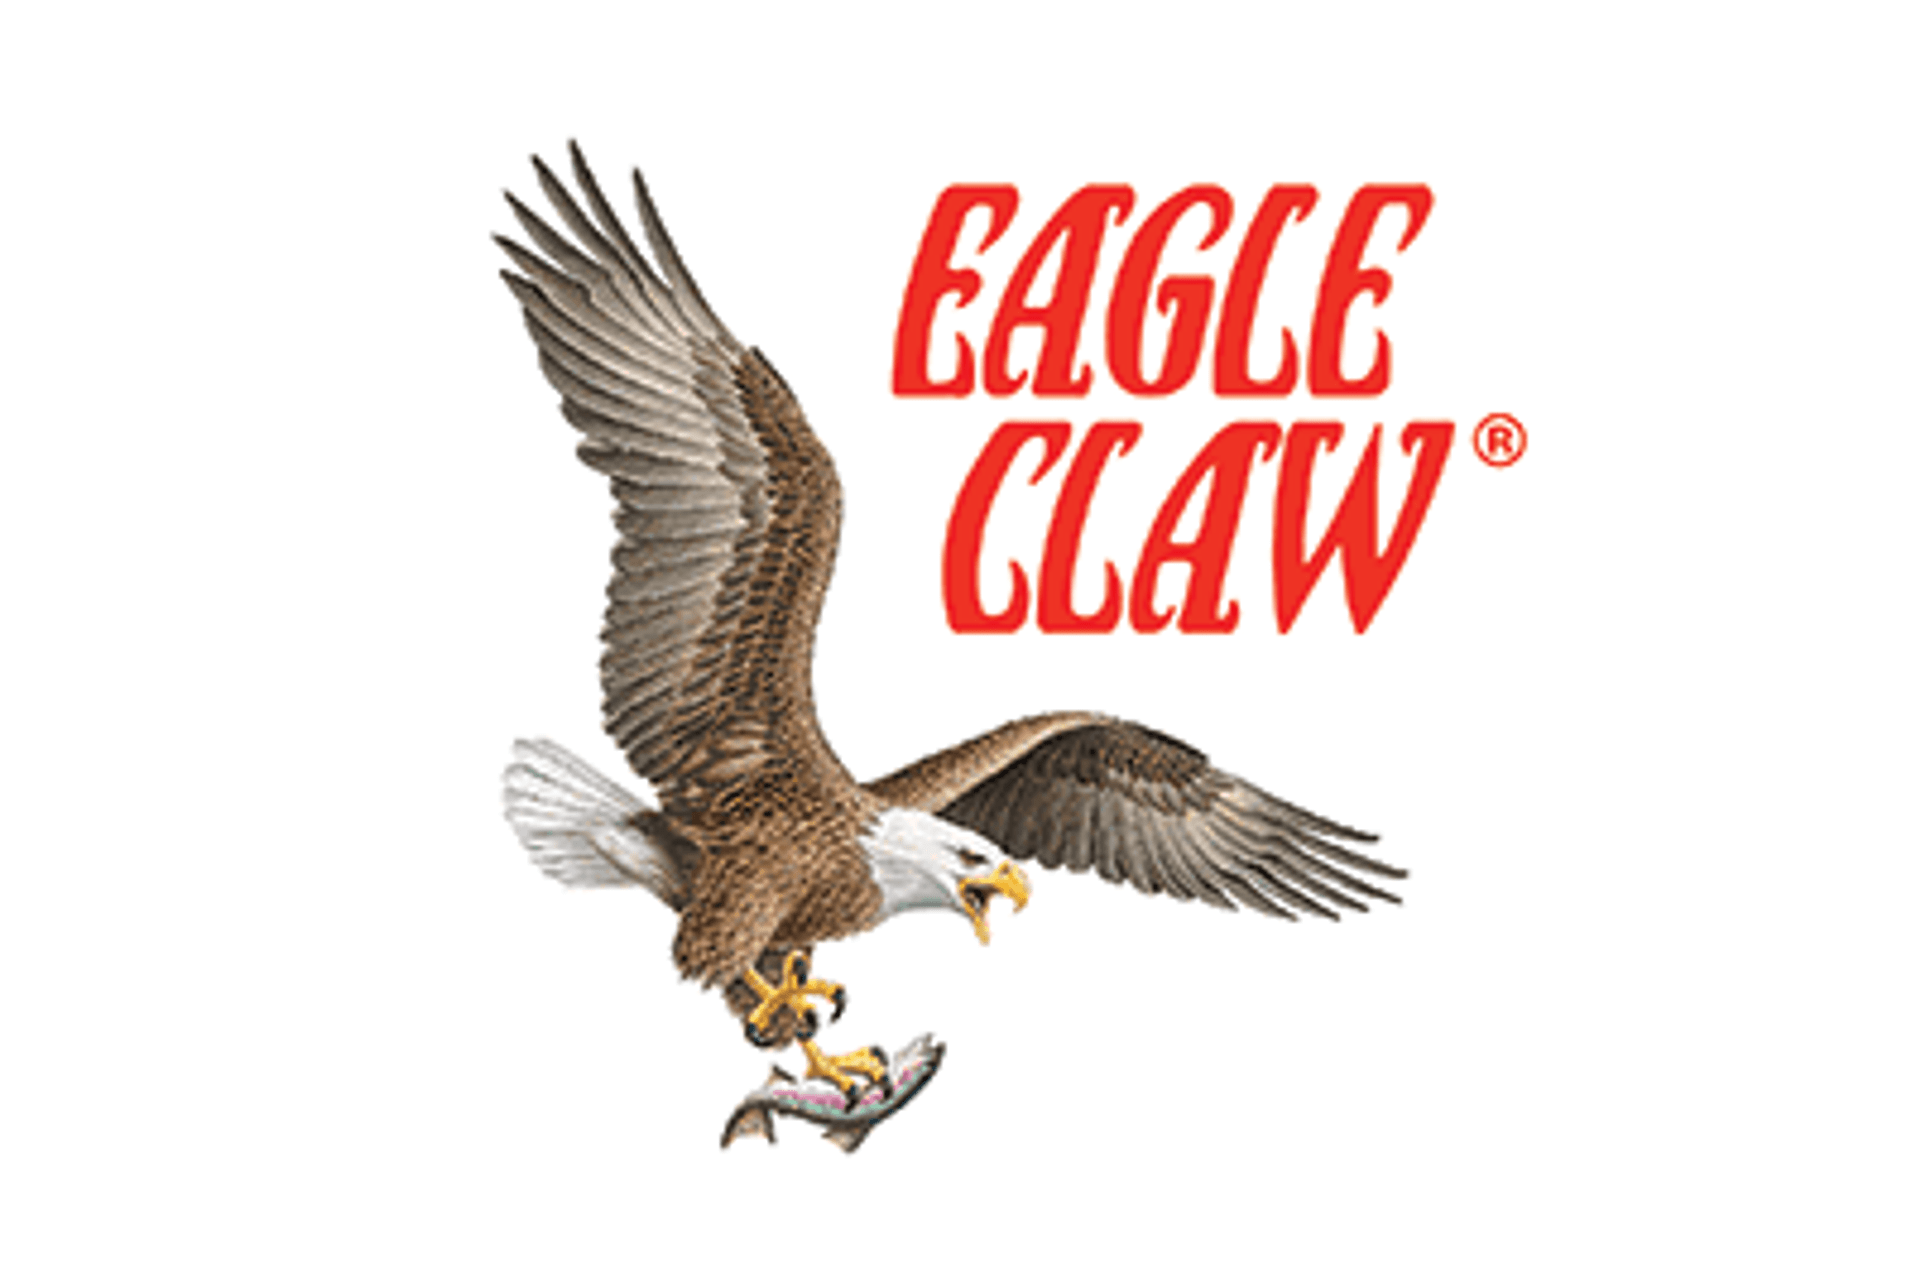 https://cdn11.bigcommerce.com/s-1q7ziyvjej/images/stencil/1920w/image-manager/eagle-claw-logo-1-.png?t=1708088006